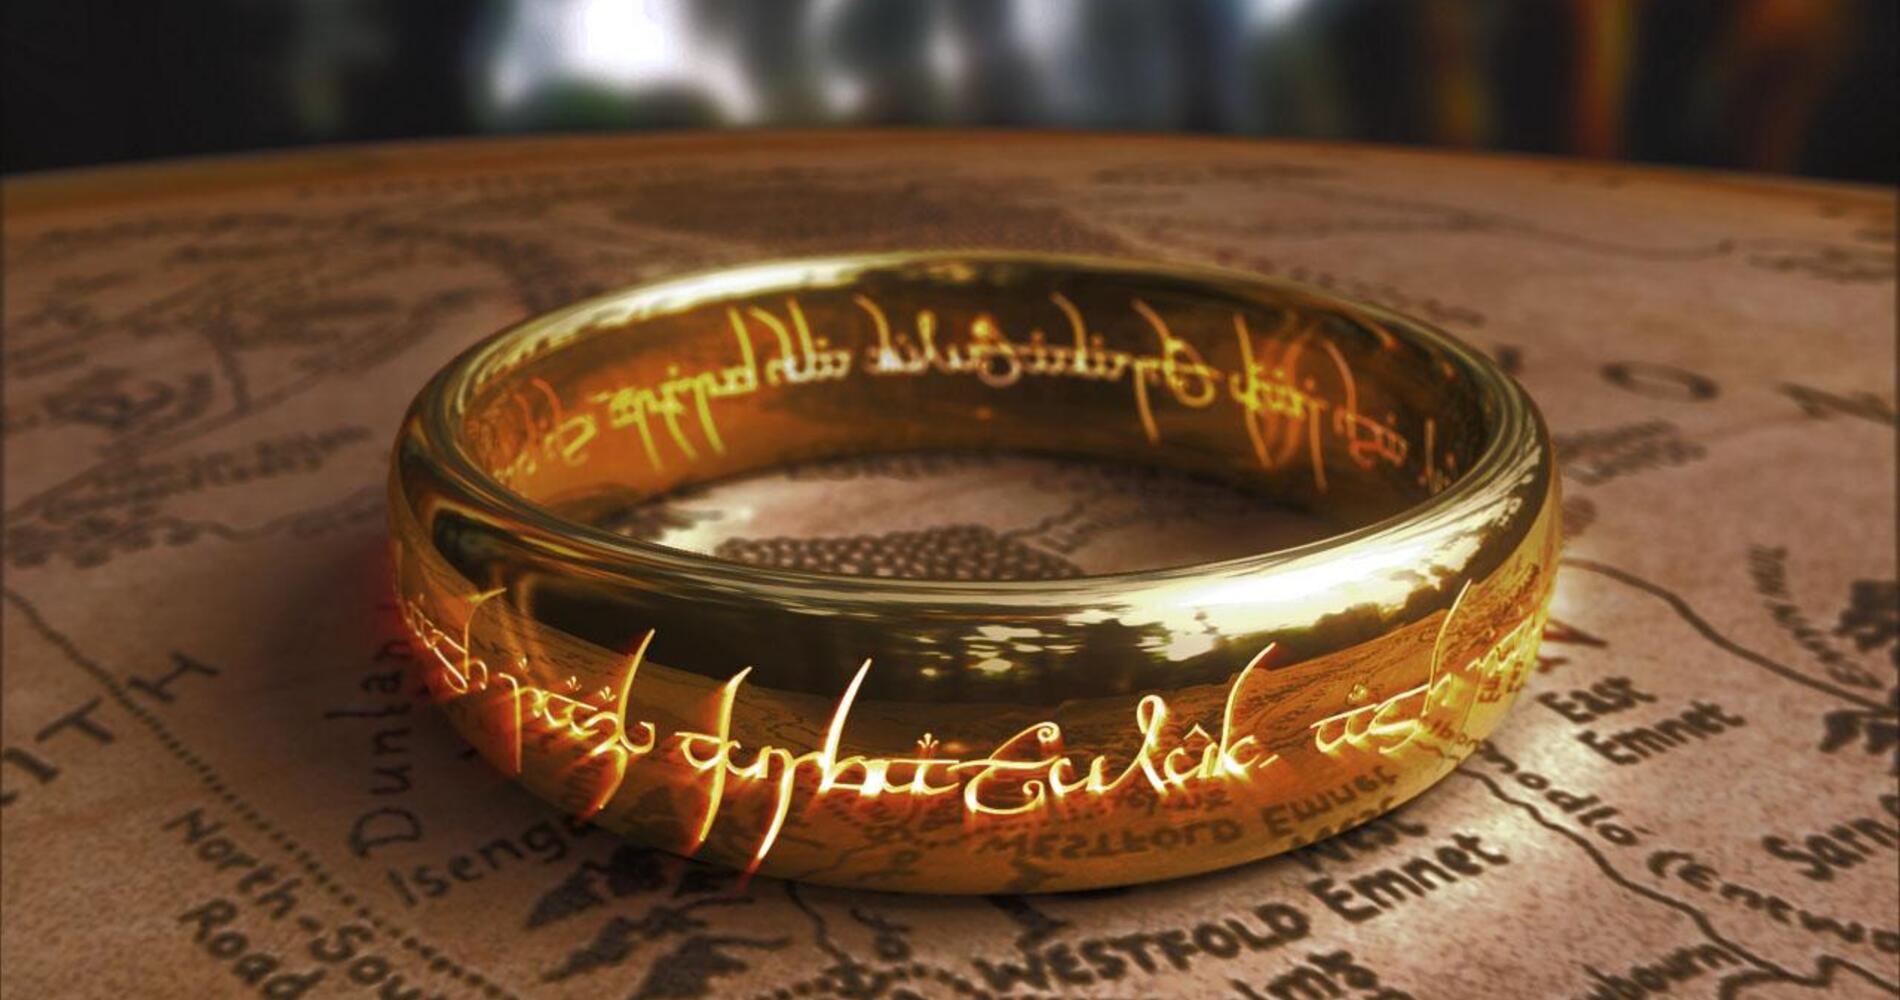 Lord Of The Rings: 10 Scenes That Make Viewers Nervous When Rewatching